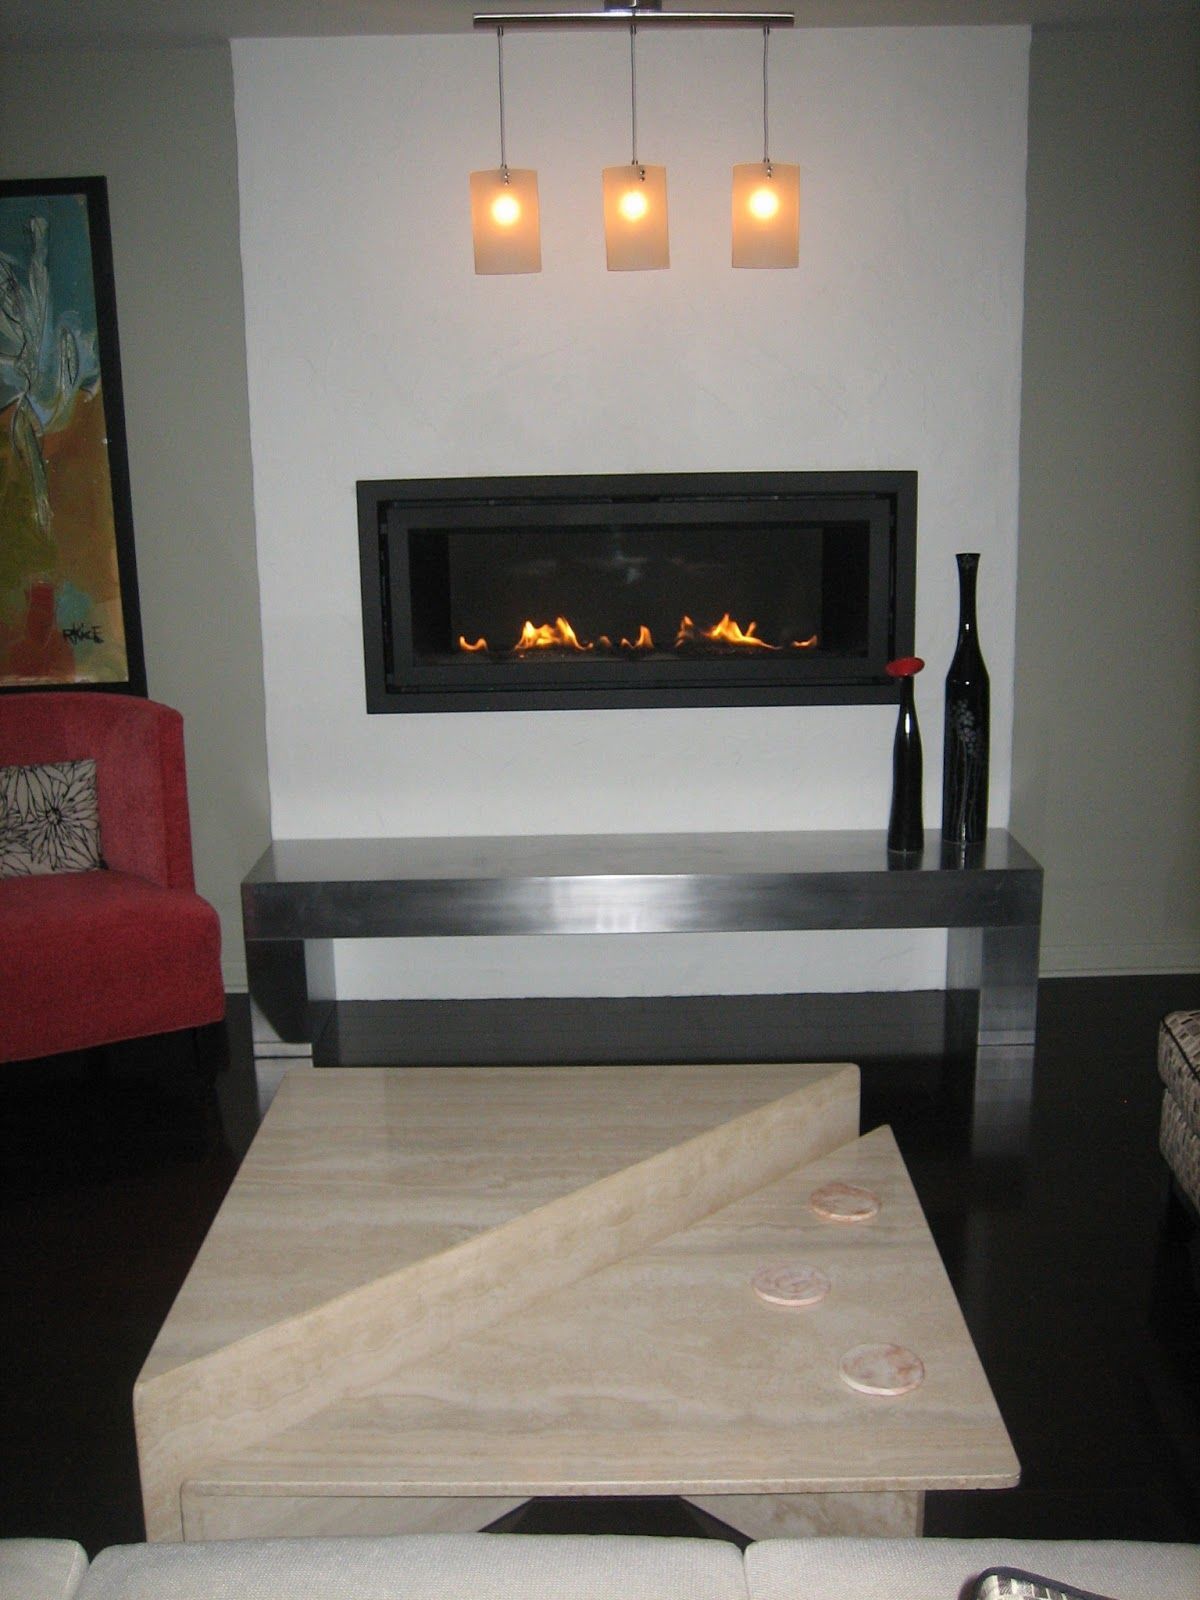 Lighting A Fireplace Inspirational Pin by Ebooklover On Fireplace